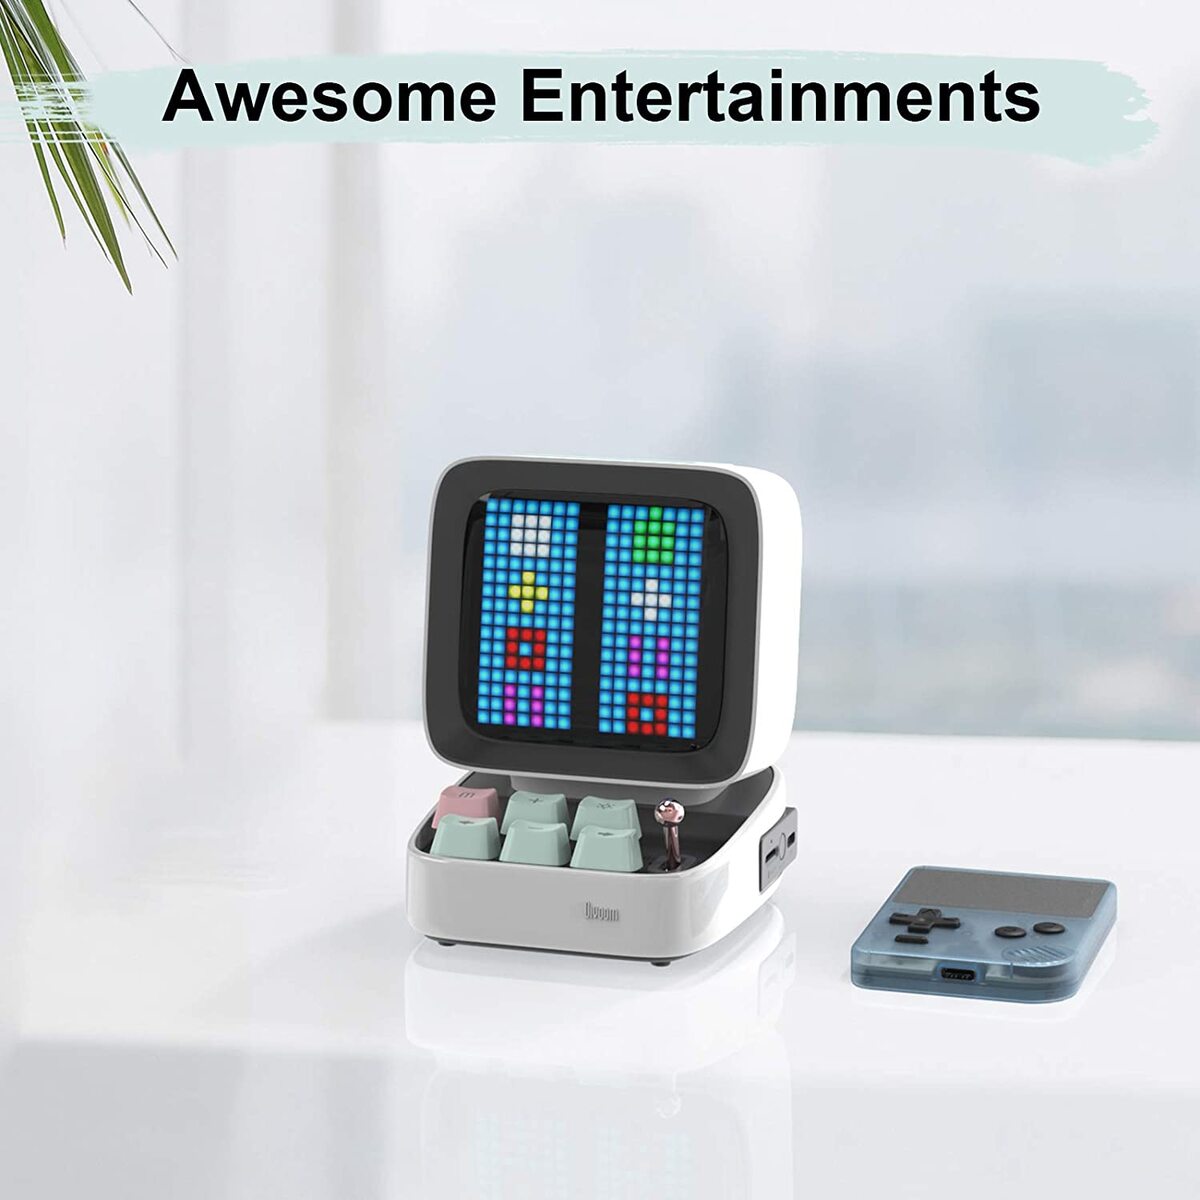 Also a Smart Alarm Divoom Ditoo Pixel Art Gaming Portable Bluetooth Speaker with App Controlled 16X16 LED Front Panel White 